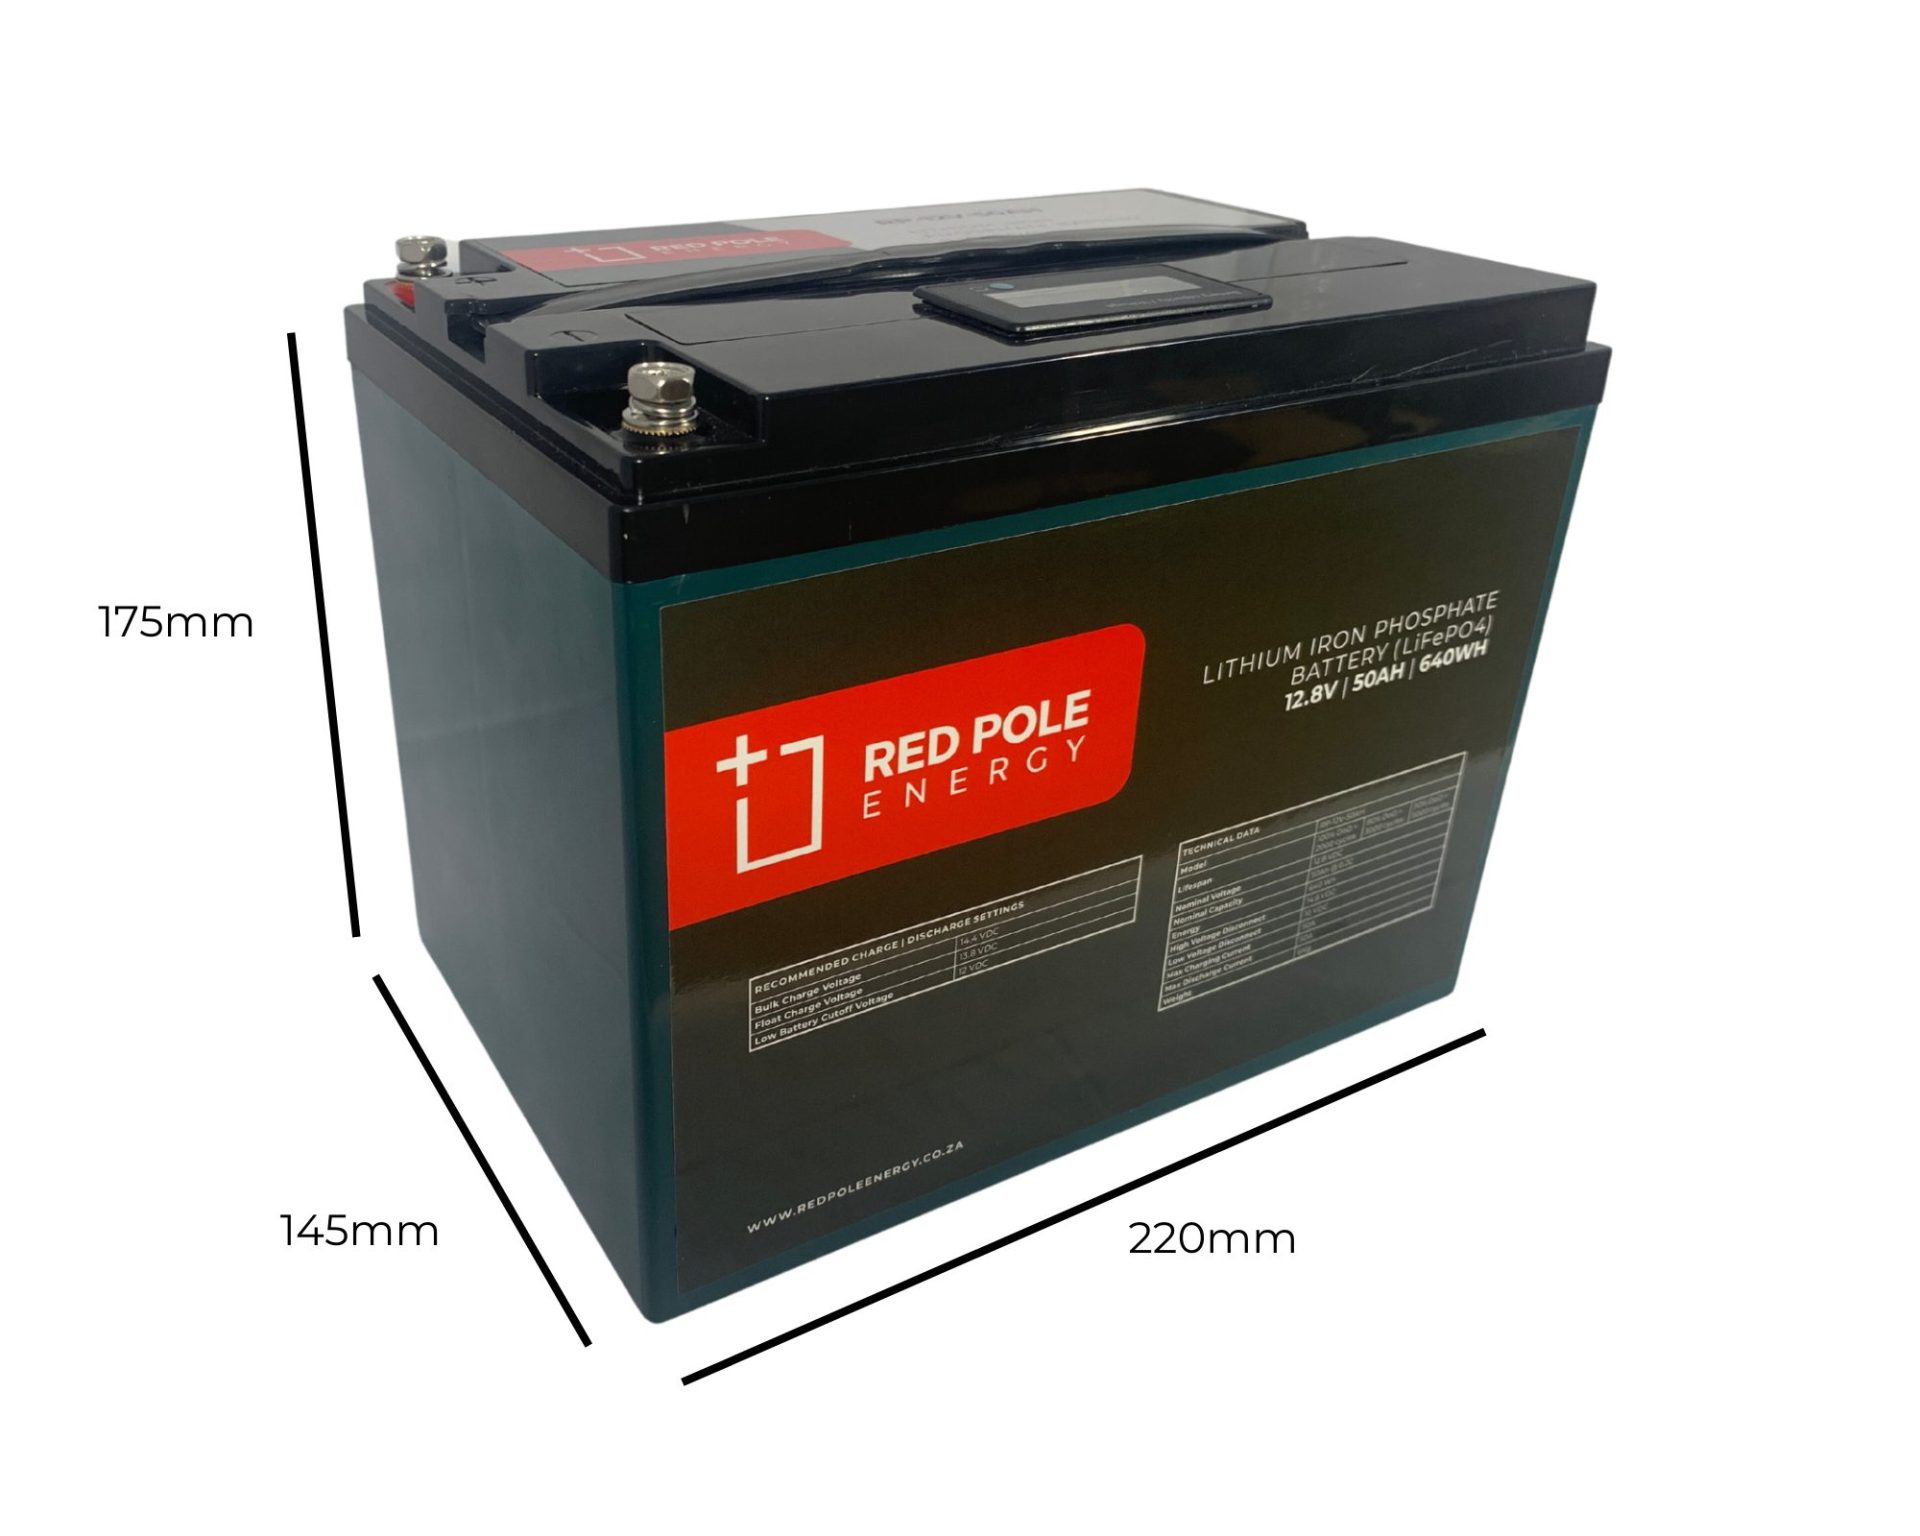 LiFePO4 battery 50Ah 12.8V 640Wh lithium iron phosphate